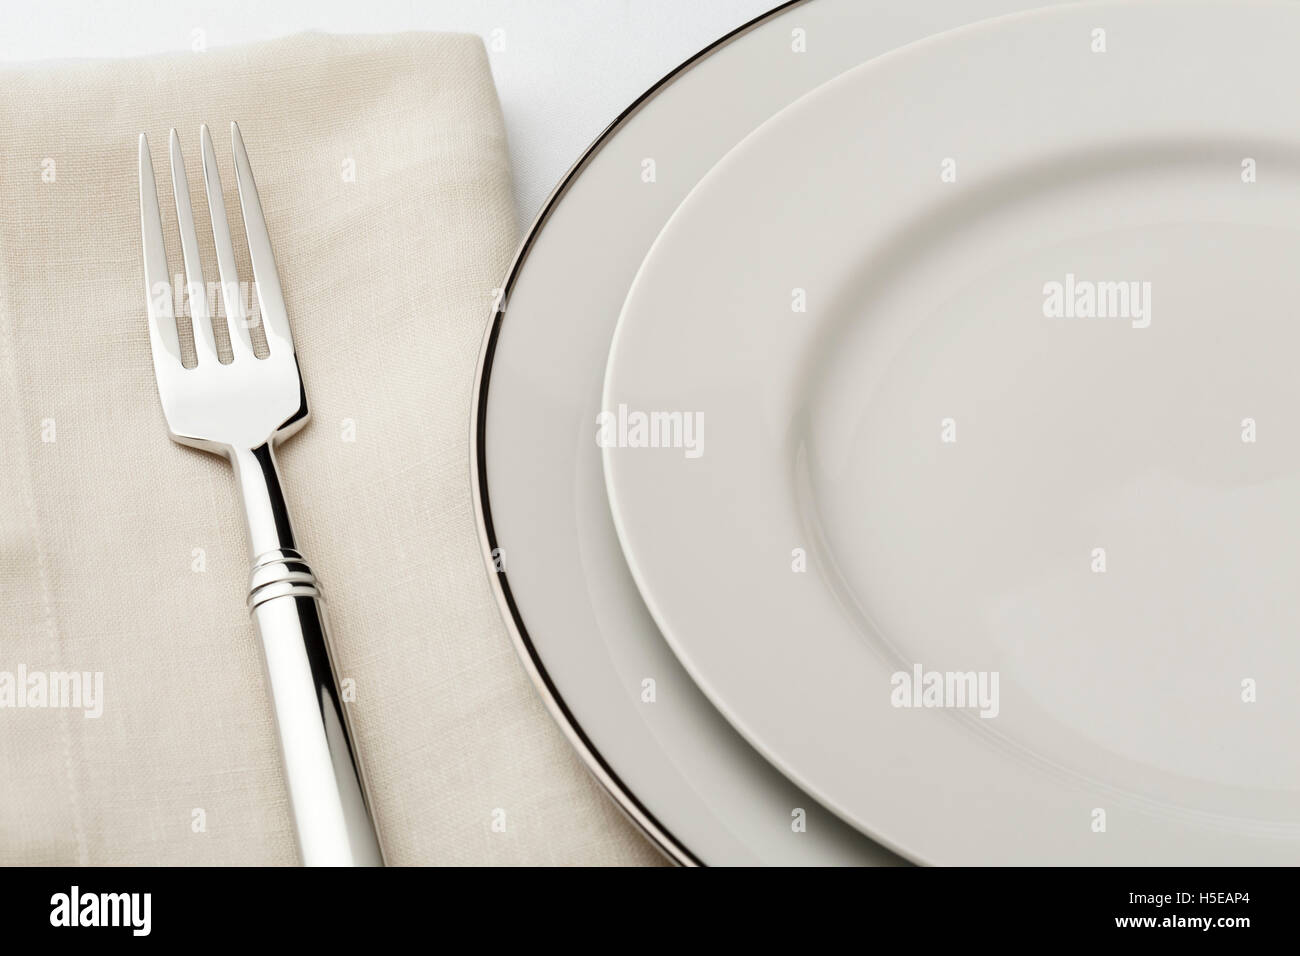 Fine dining table setting place setting with high quality classic style white china dishes, linen napkin and silverware fork Stock Photo